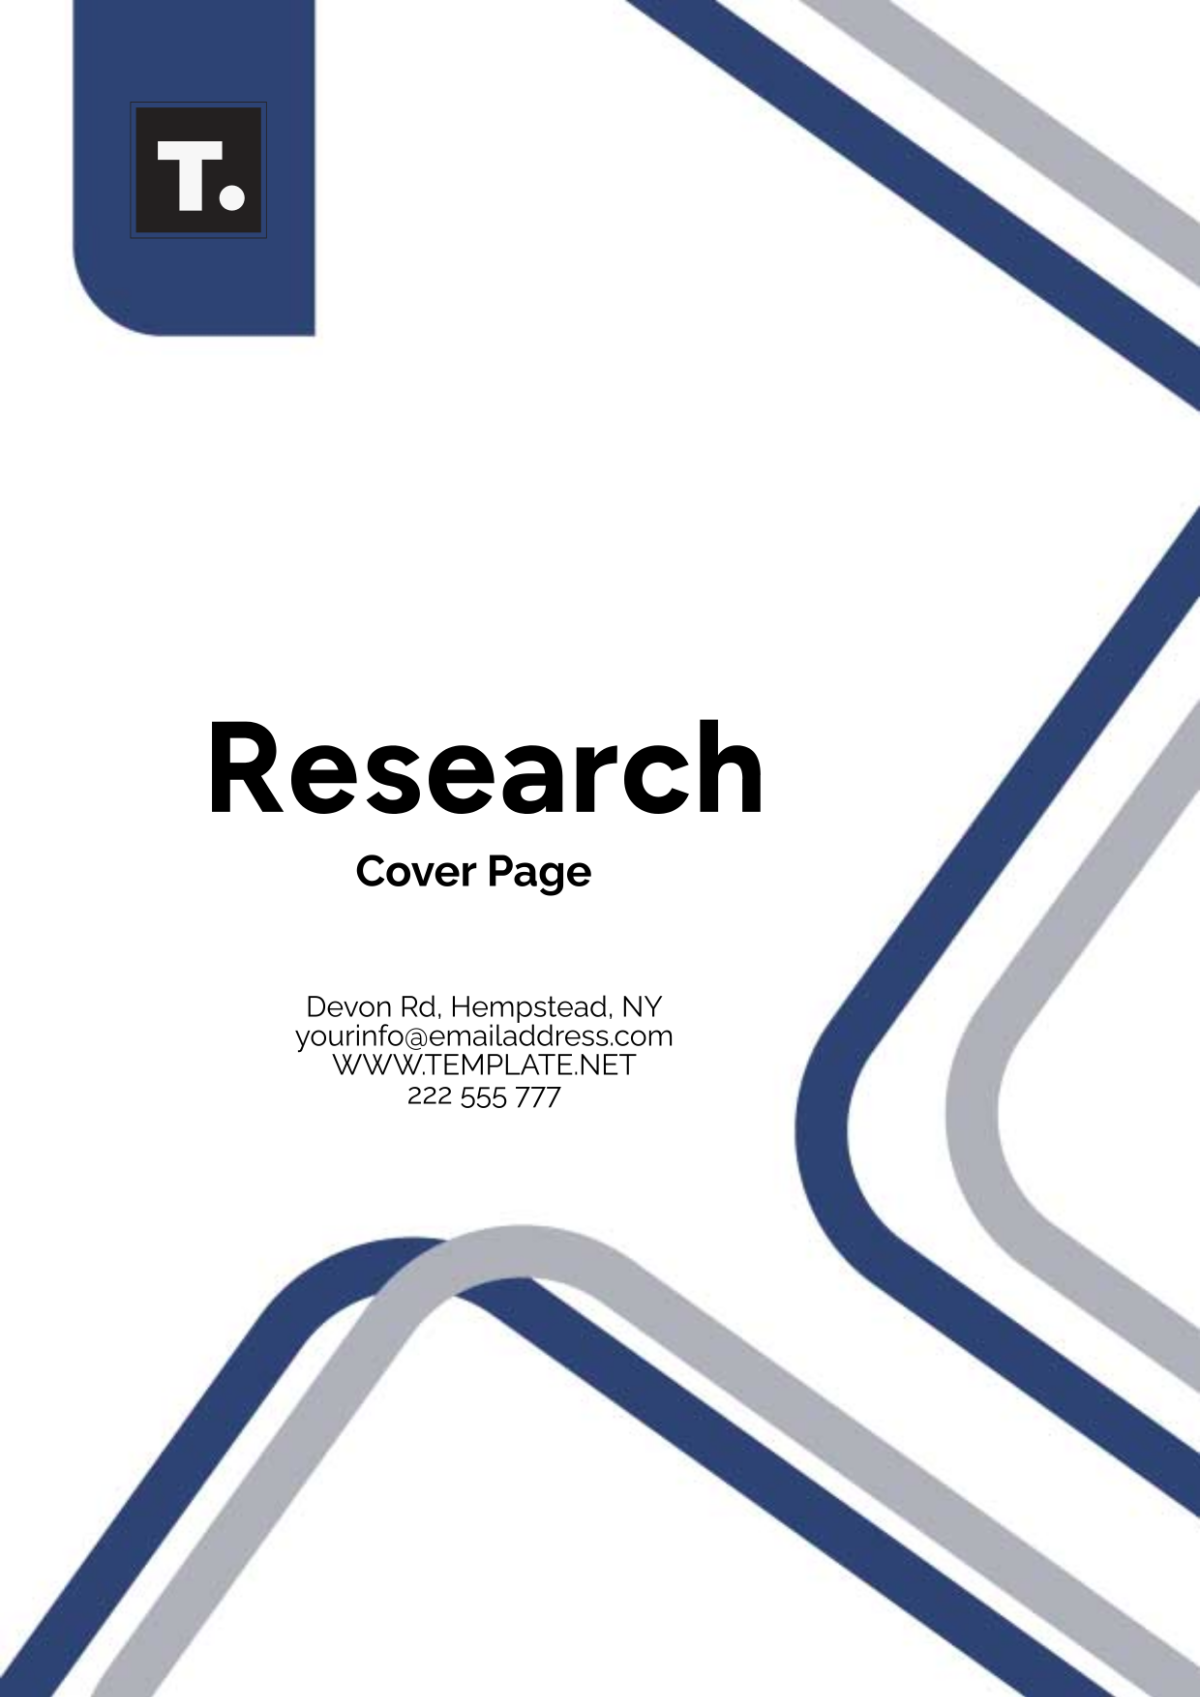 Research Cover Page